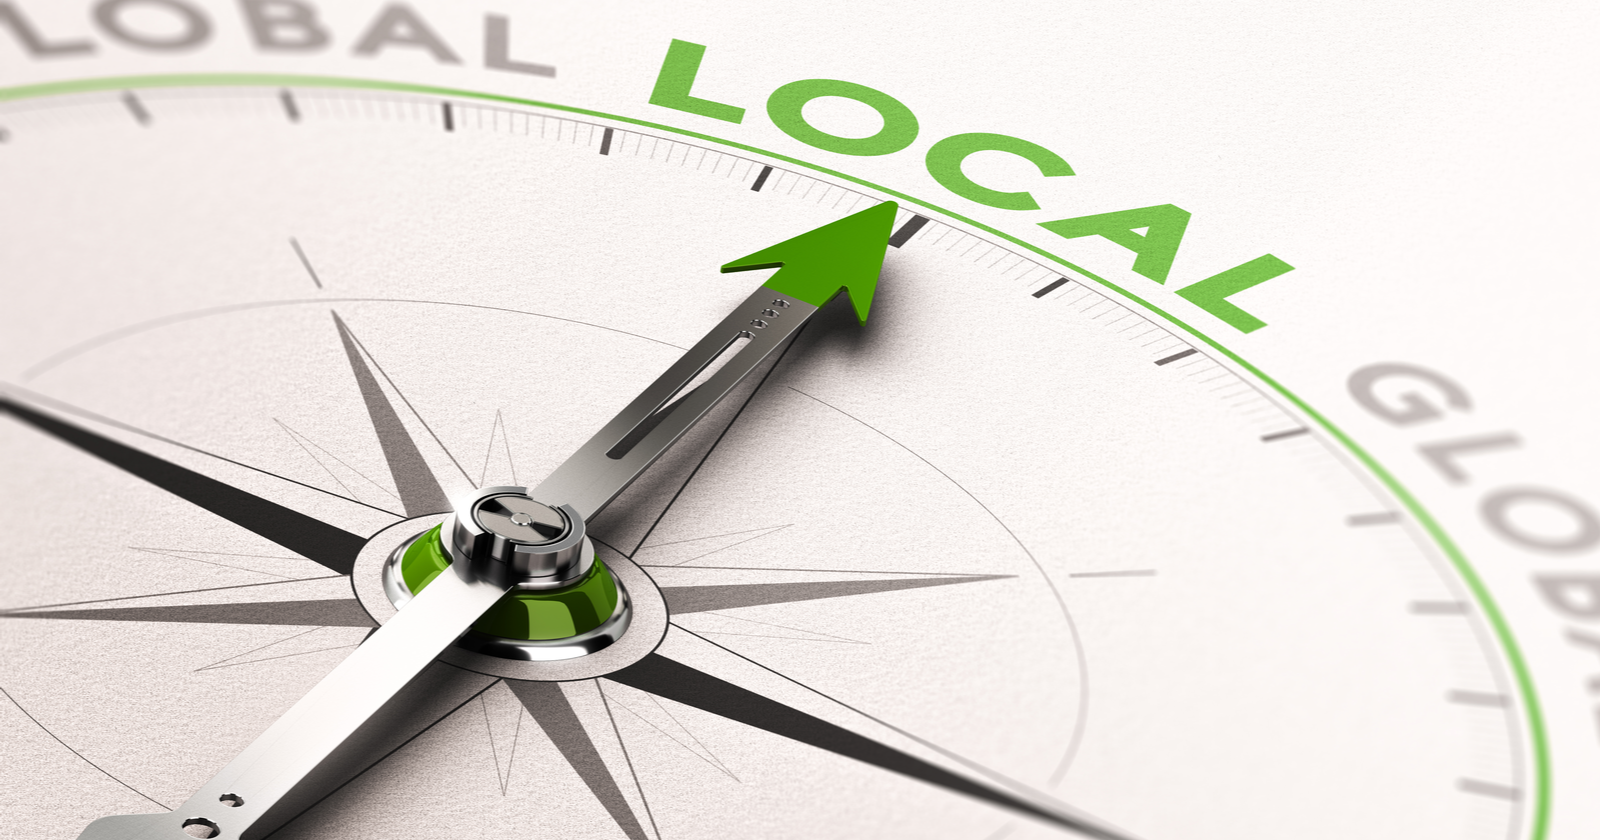 local-seo-strategies-for-smbs-62286d3b077d4-sej.png